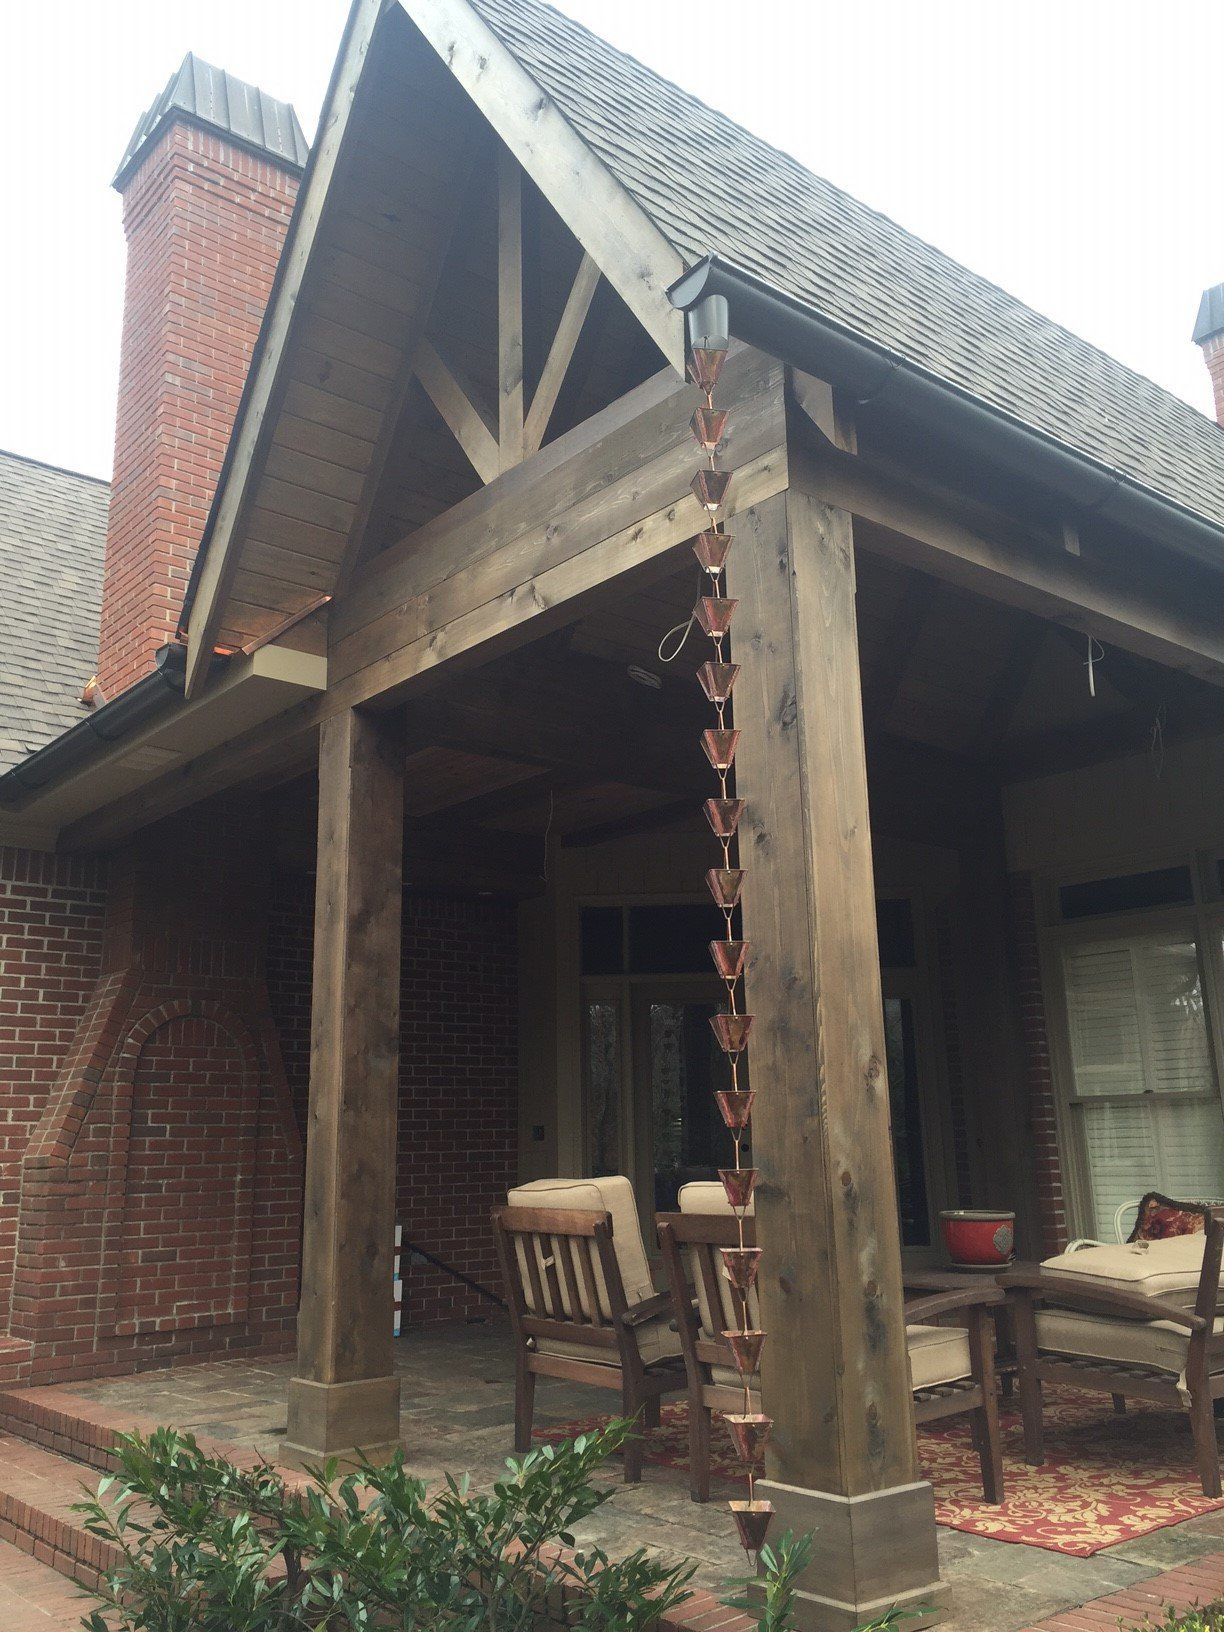 Covered patio - B & B Roofing in Decatur, AL